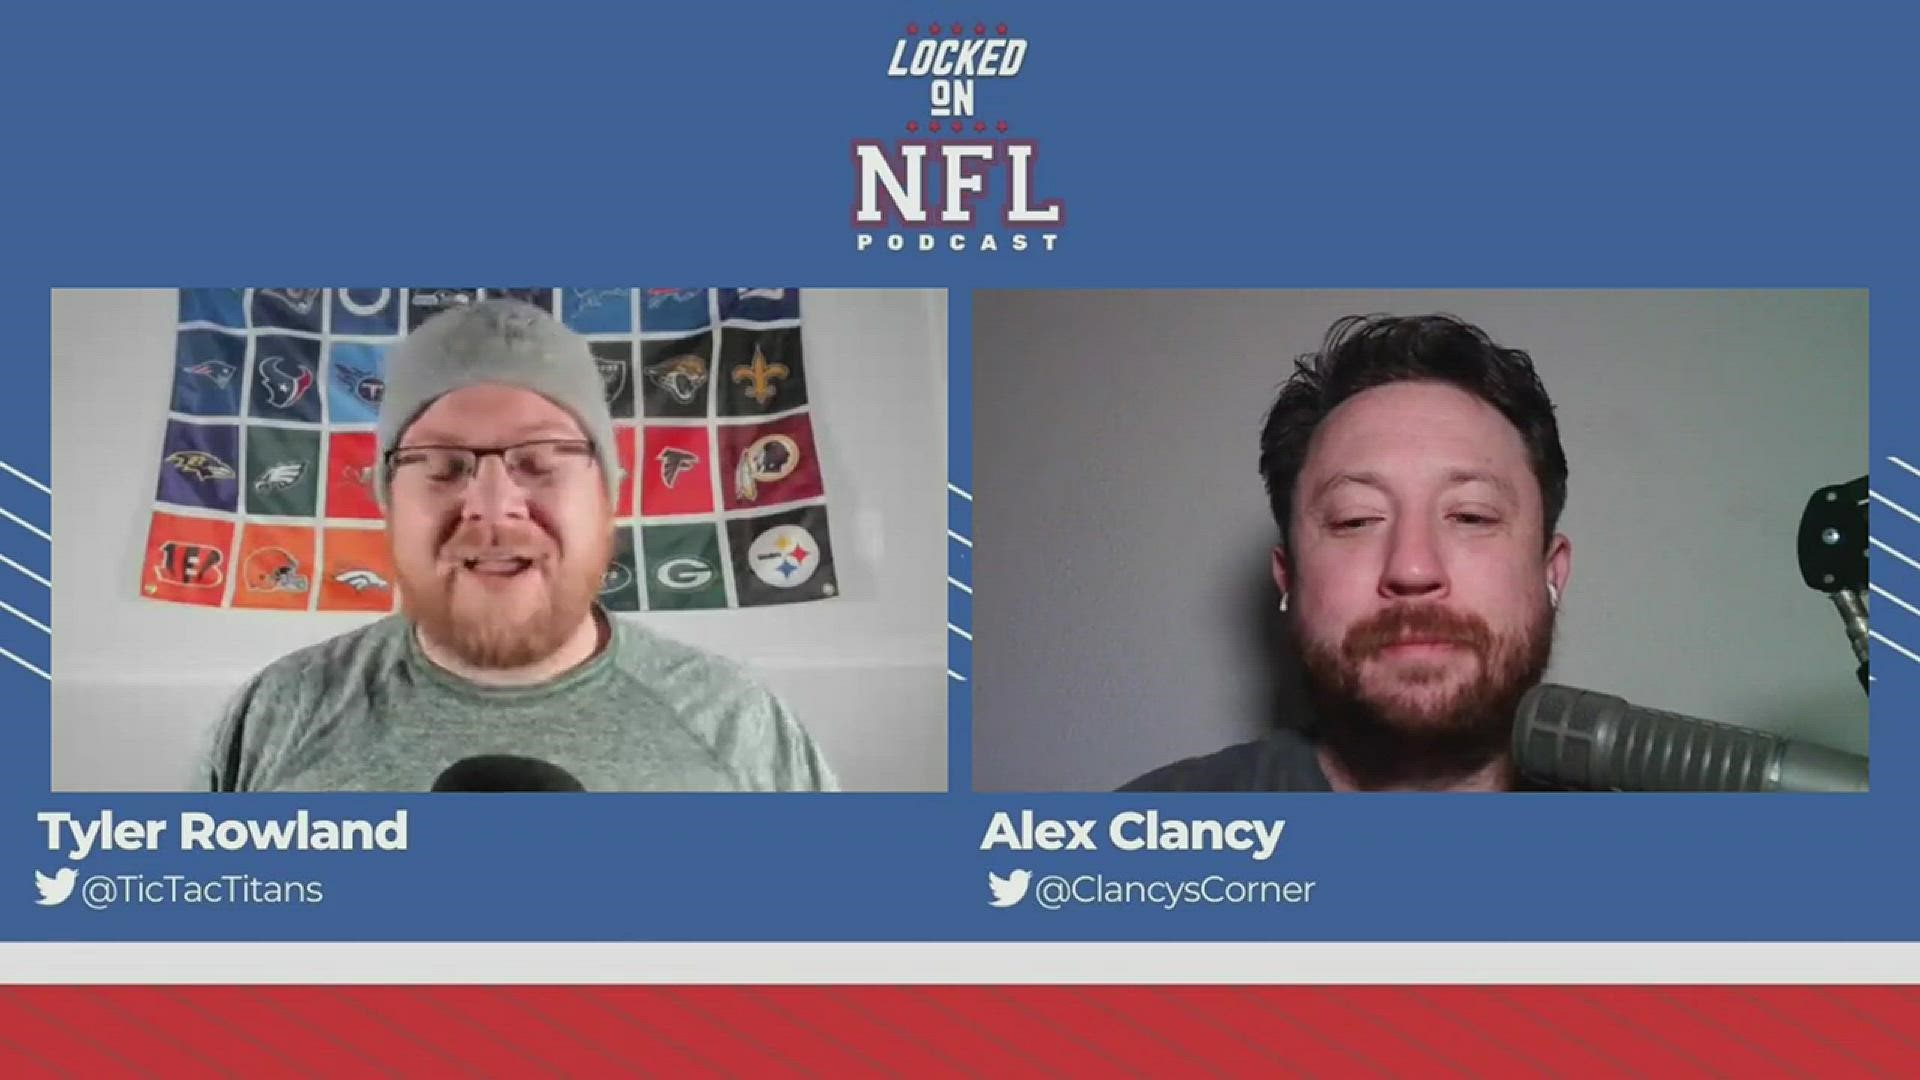 Tyler and Alex are back for another Thursday Locked On NFL Podcast. The guys get you ready for Thursday Night Football between Saints-Cowboys and more!